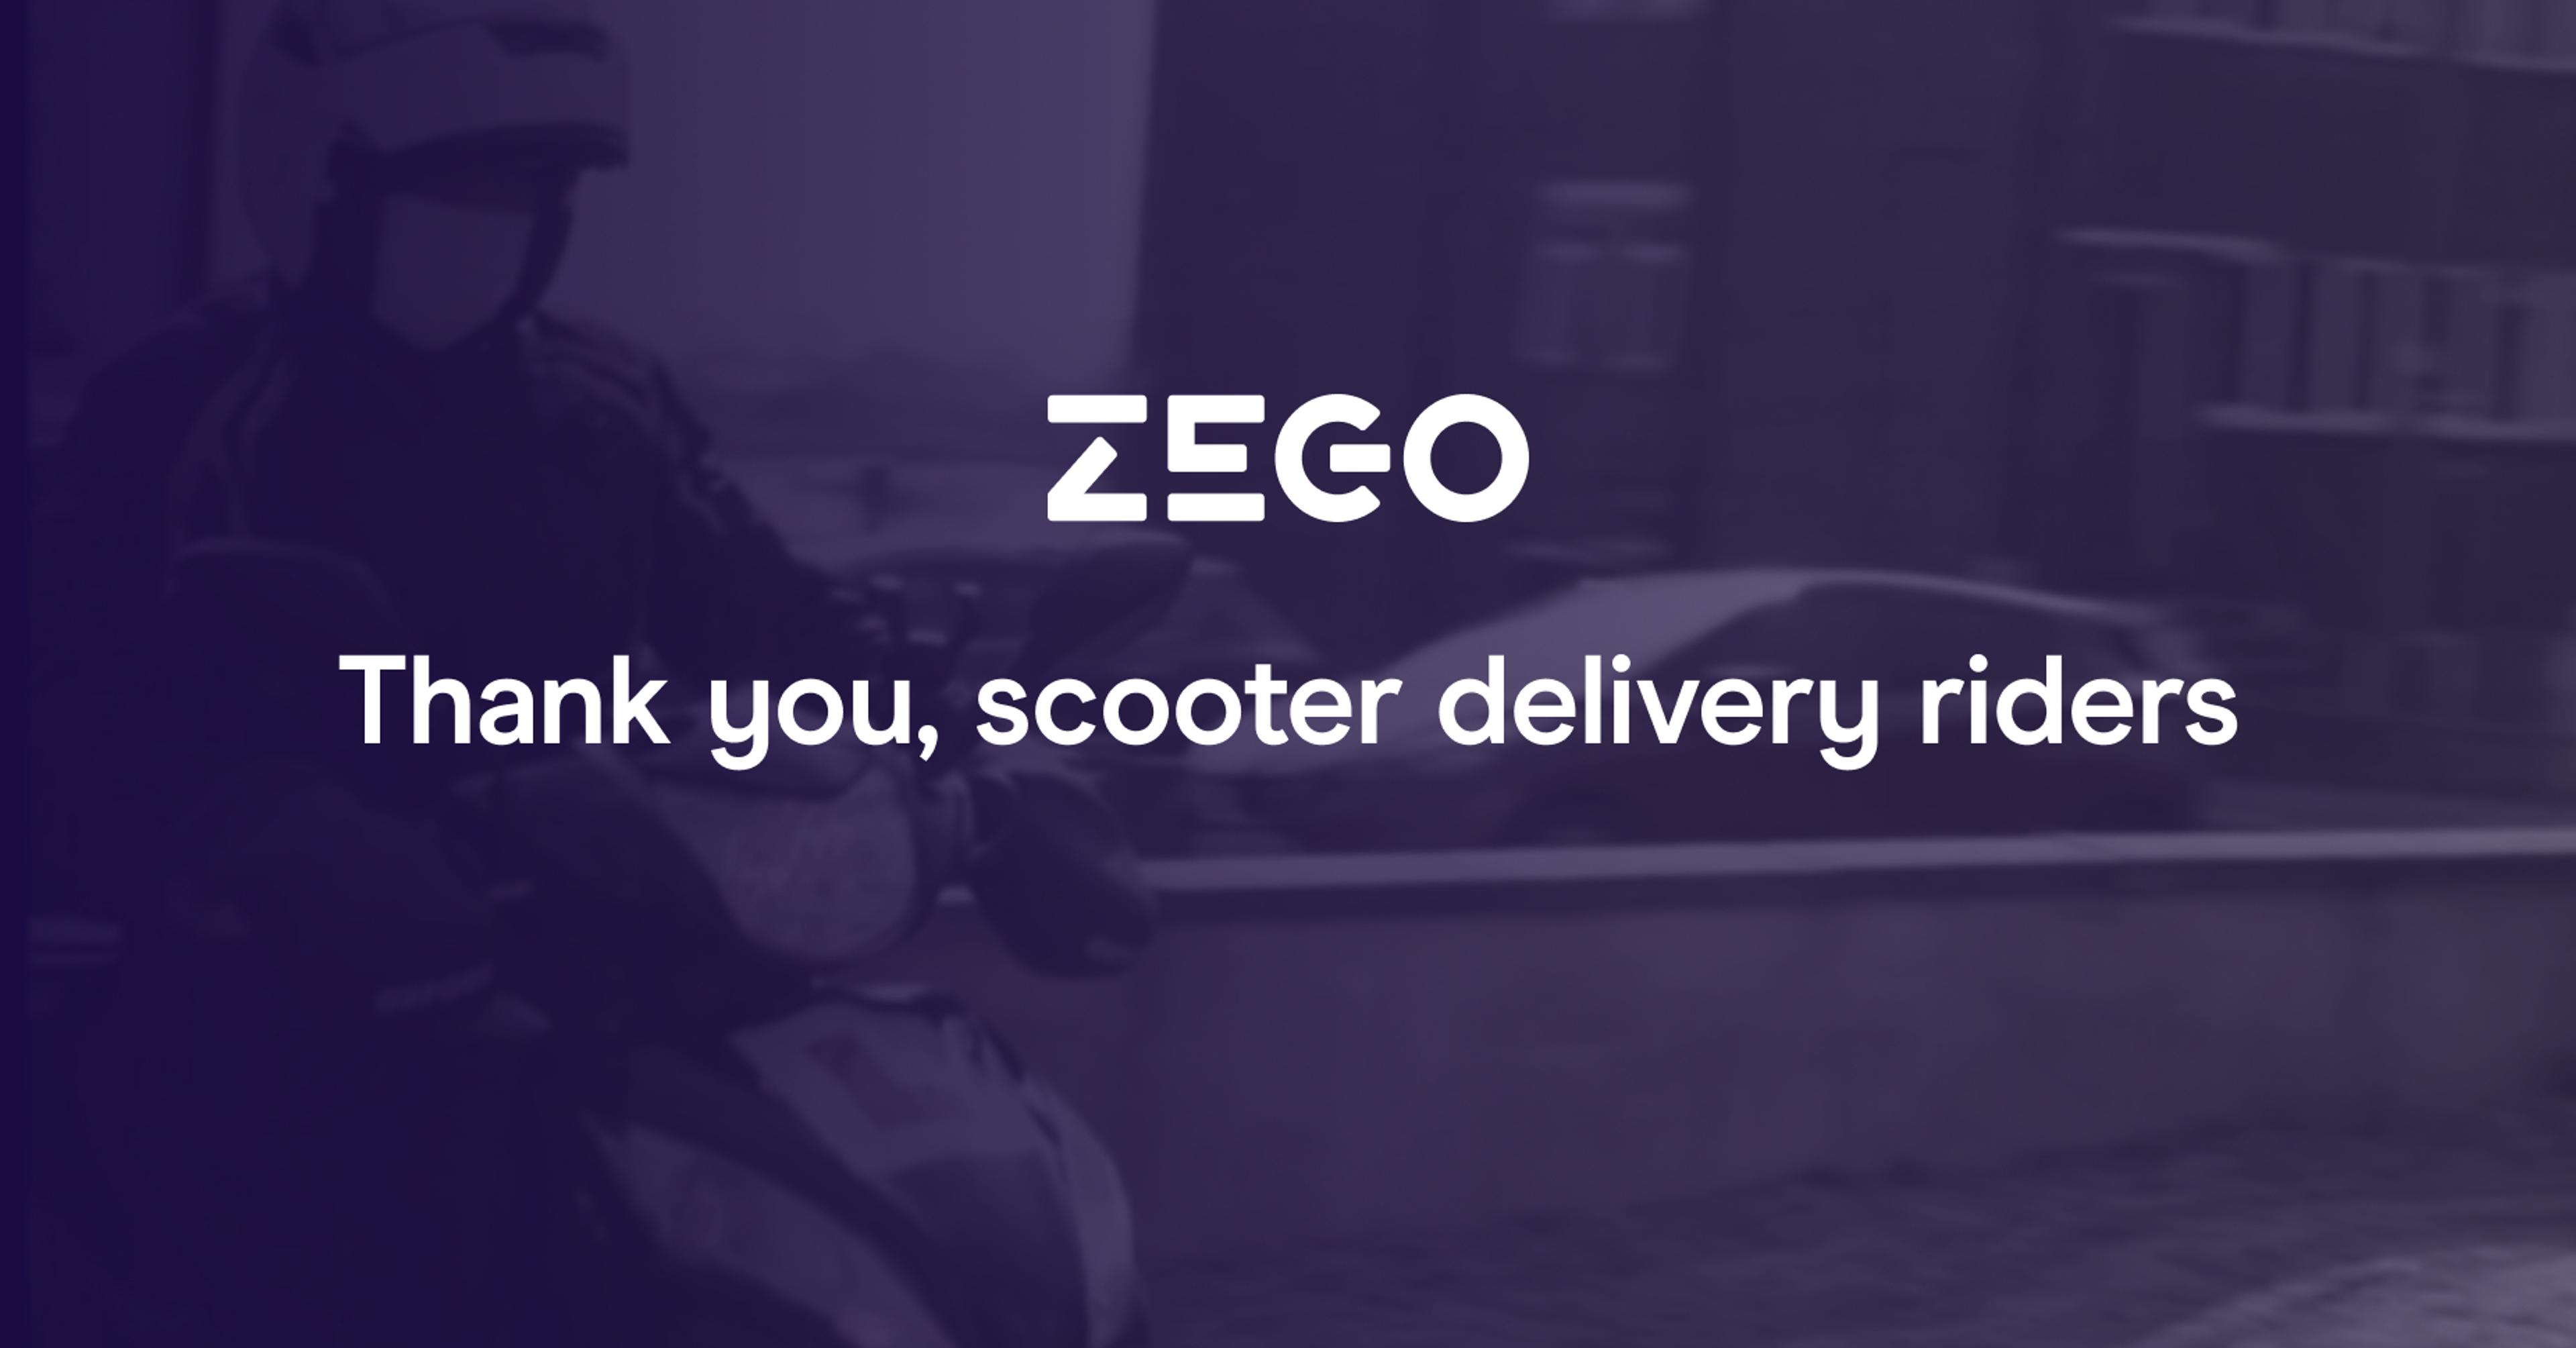 Thank you, scooter delivery riders